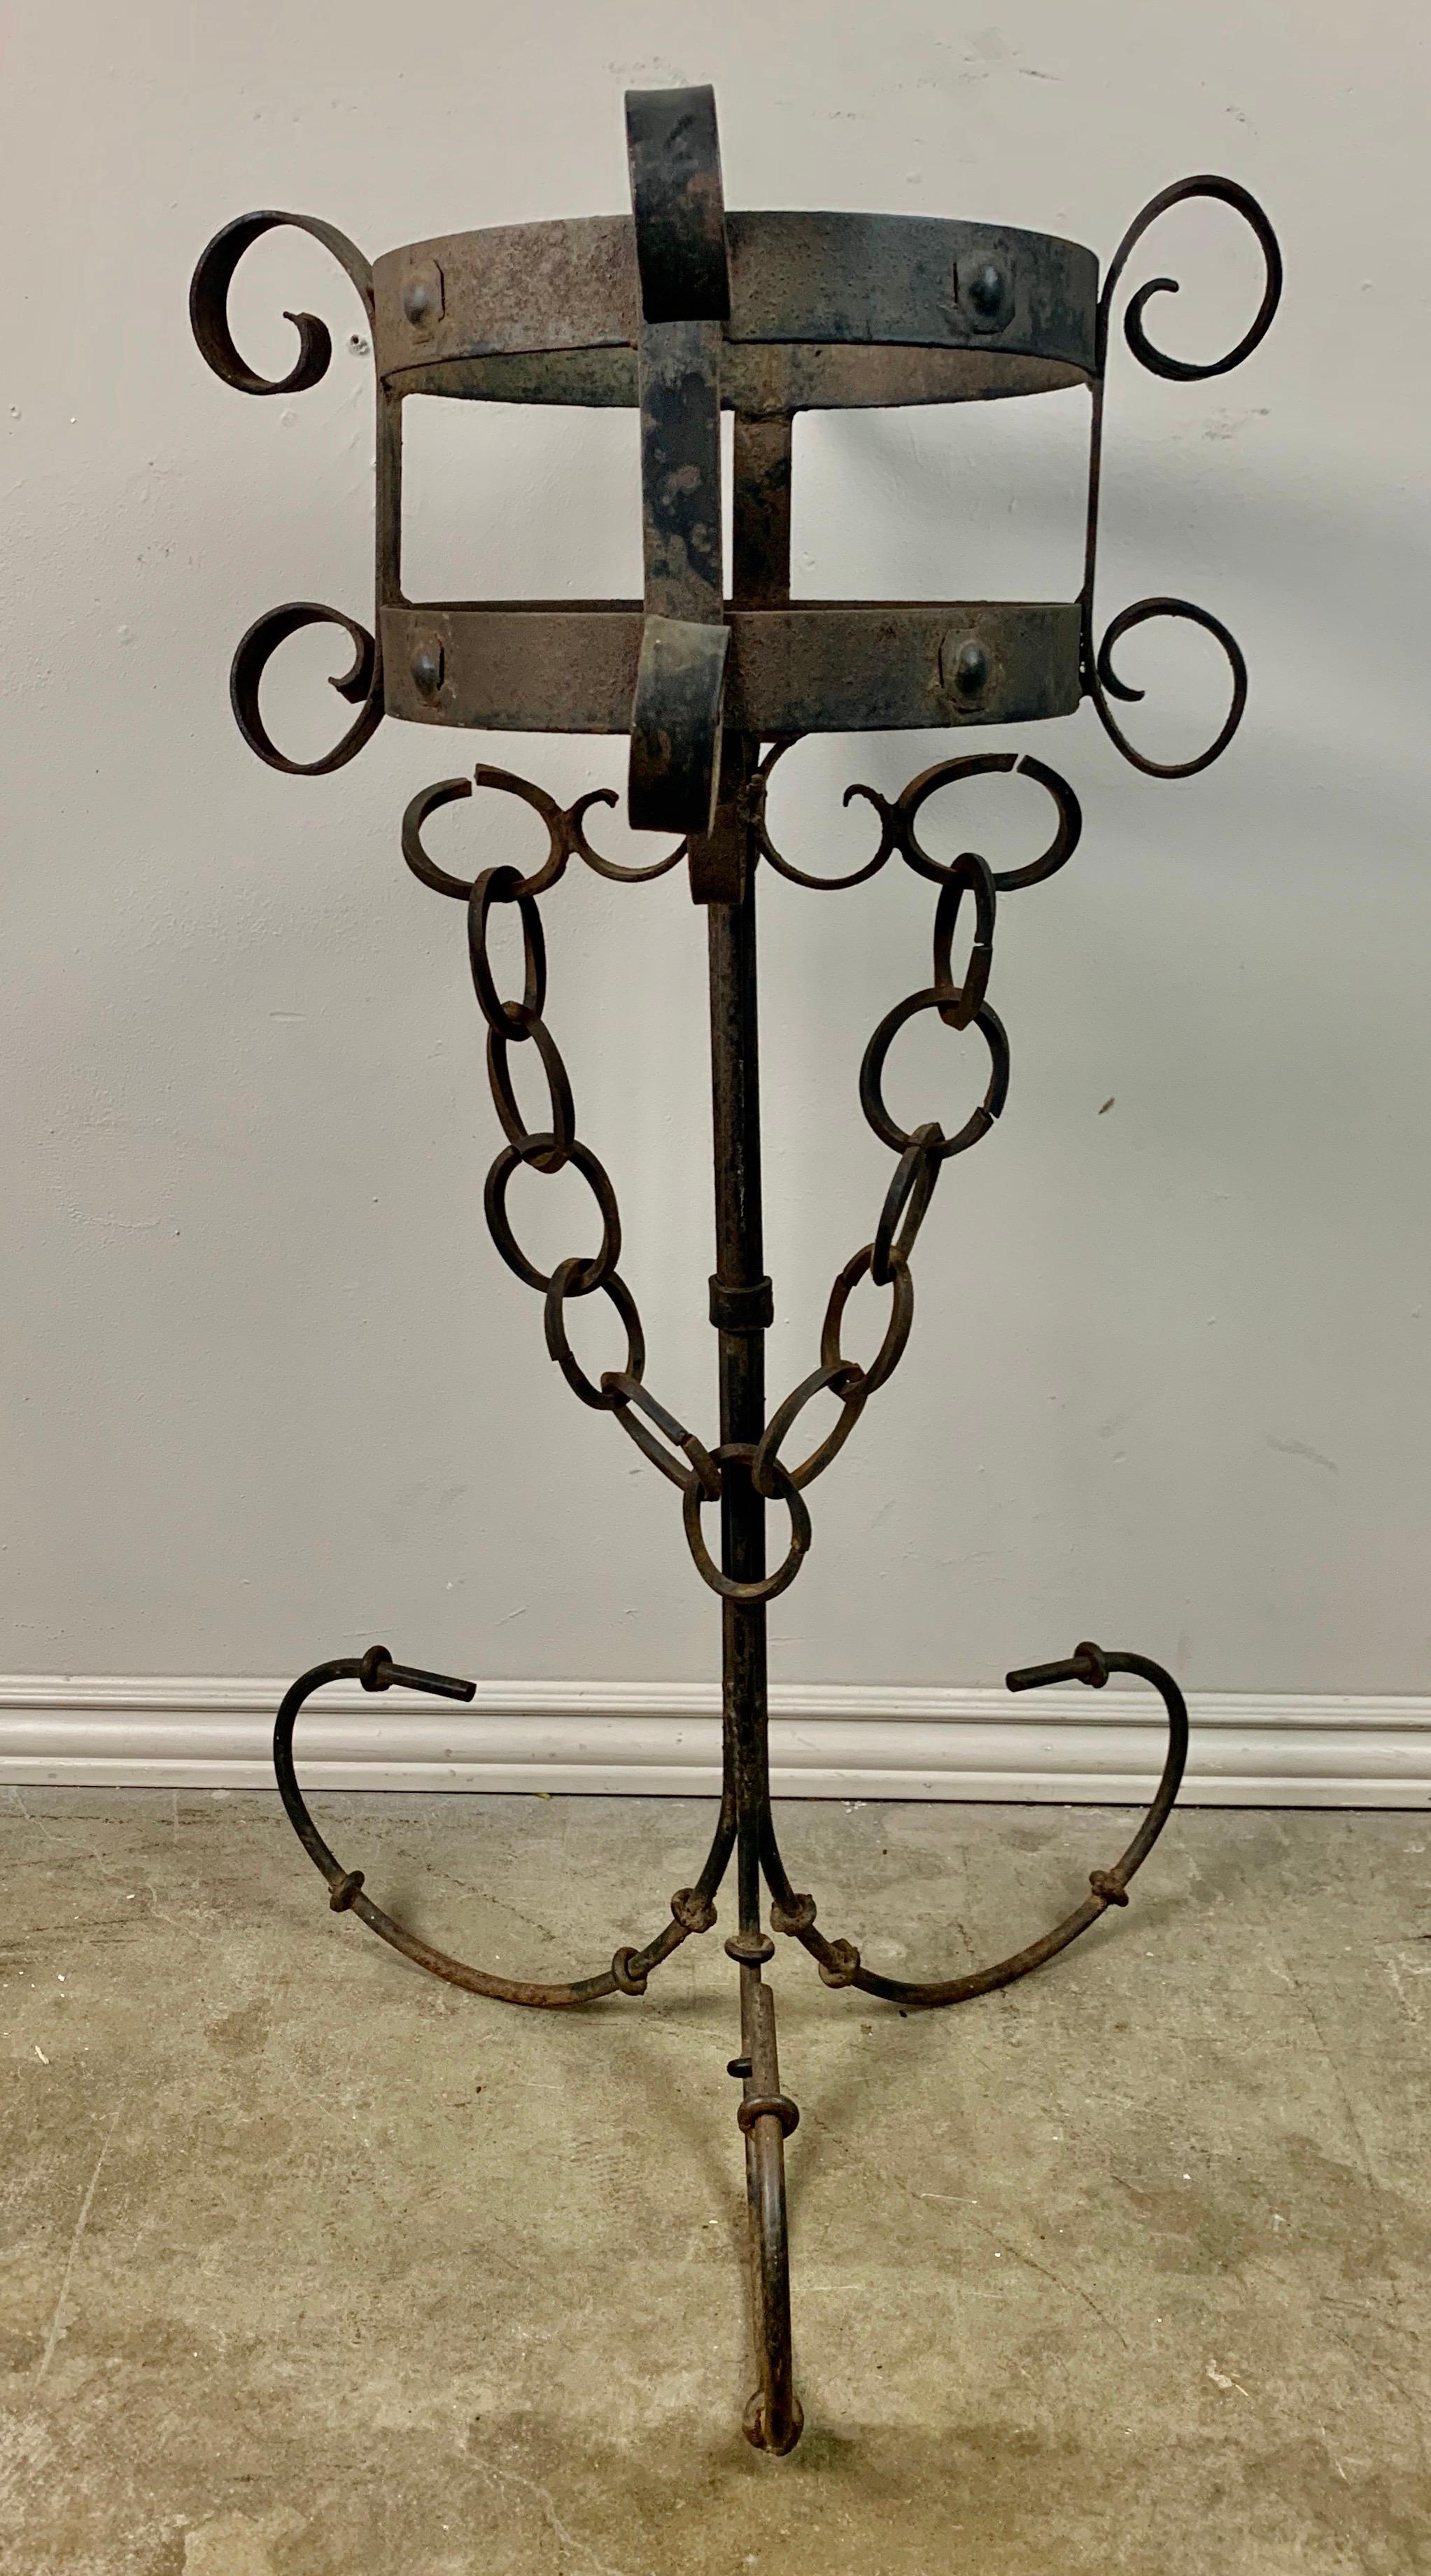 Pair of Spanish hand wrought iron planters standing on tripod bases and decorated with garlands of chain.